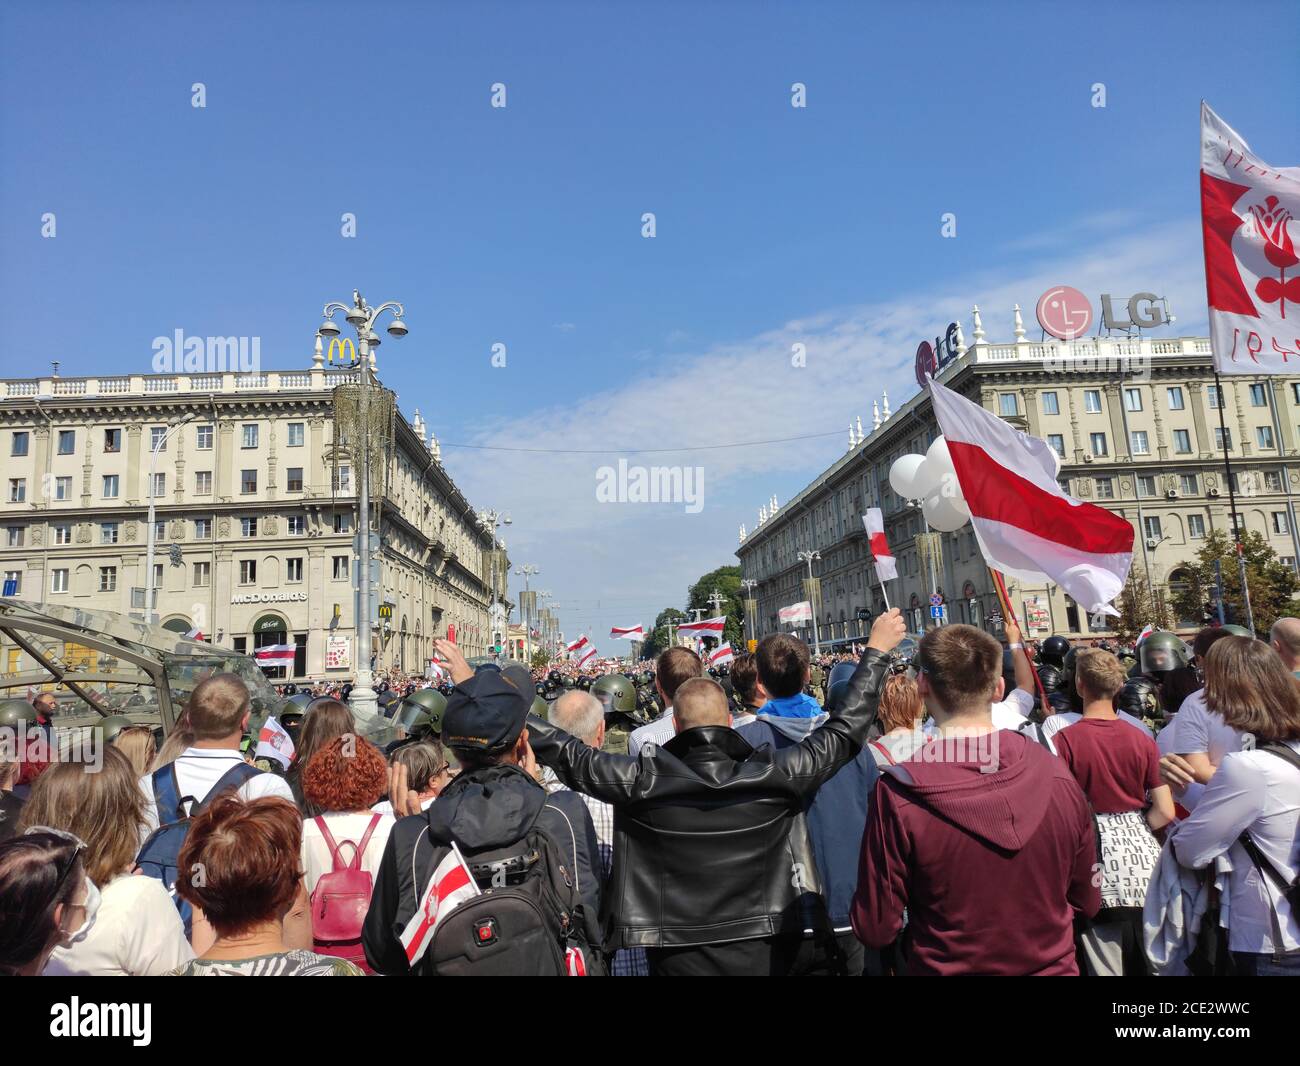 Minsk / Belarus - August 30 2020: Protesters blocked near GUM by the Internal Troops and Riot police are standing near the soldiers Stock Photo